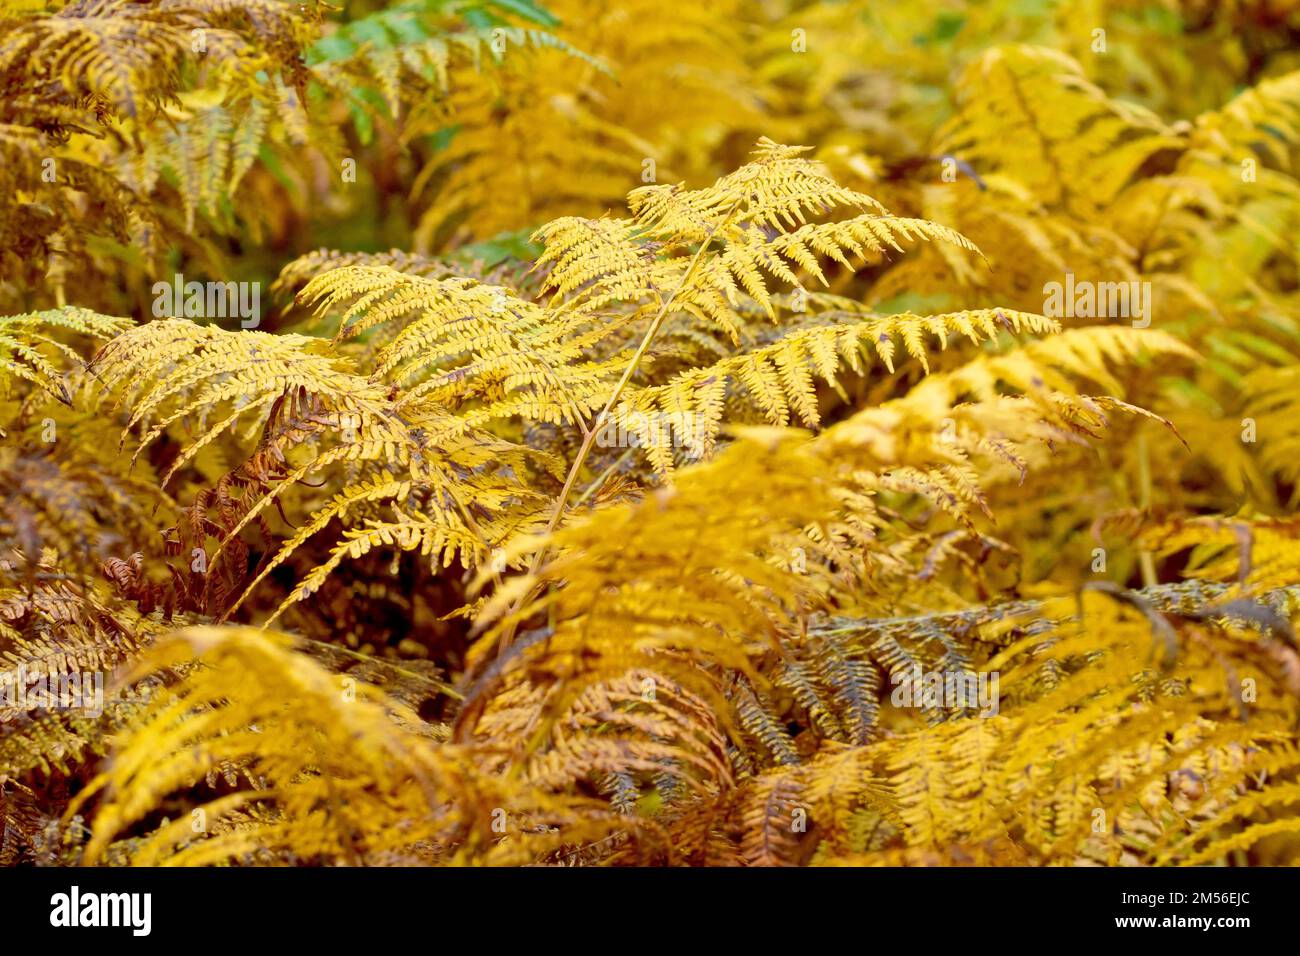 Bracken (pteridium aquilinum), close up of the common deciduous fern in its yellow and brown autumn colours. Stock Photo